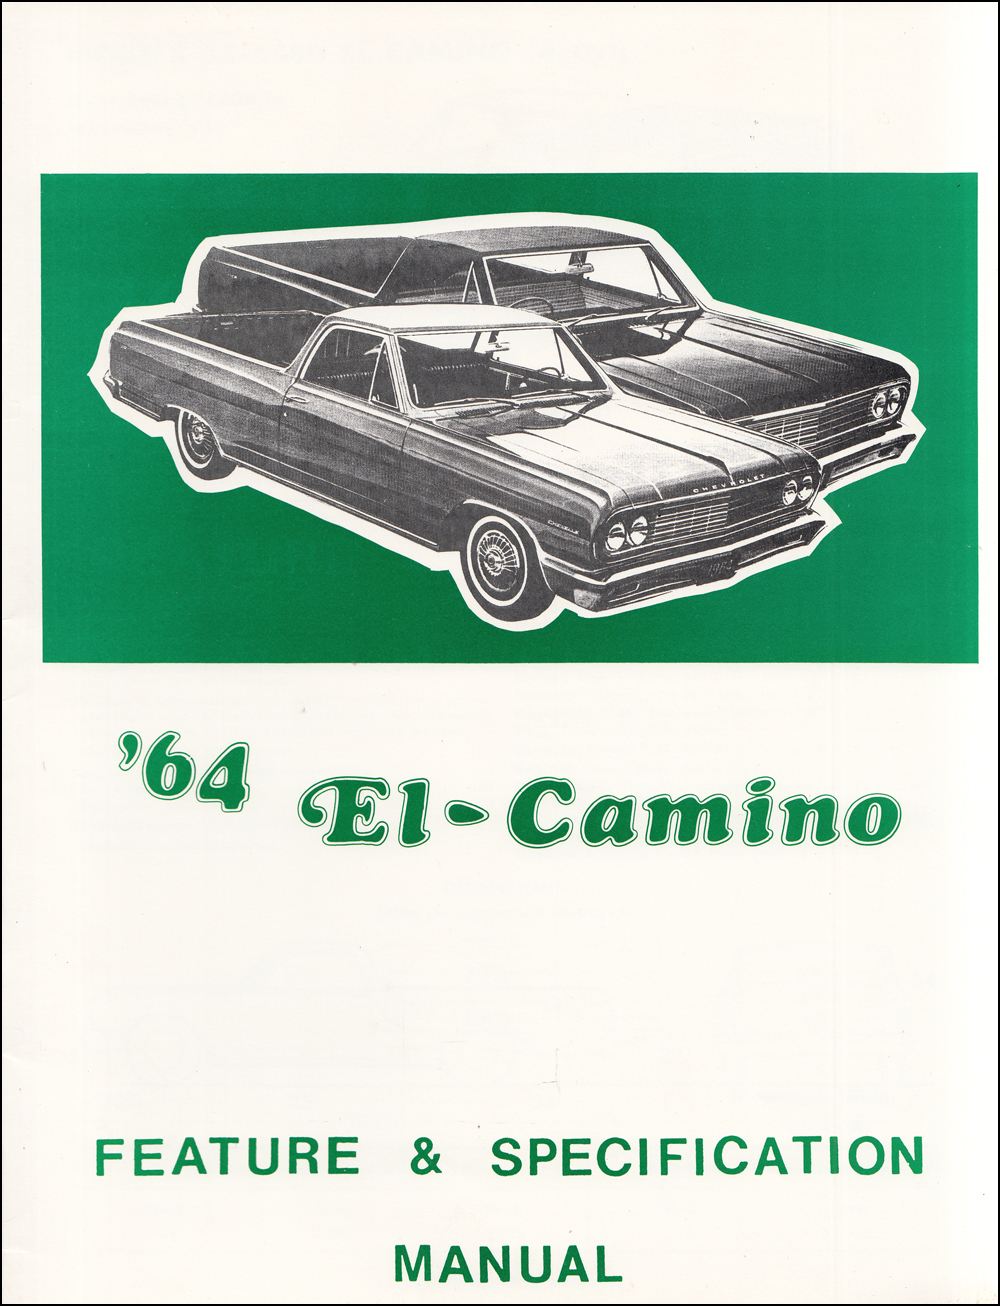 1964 Chevrolet El Camino Feature and Specification Manual Reprint